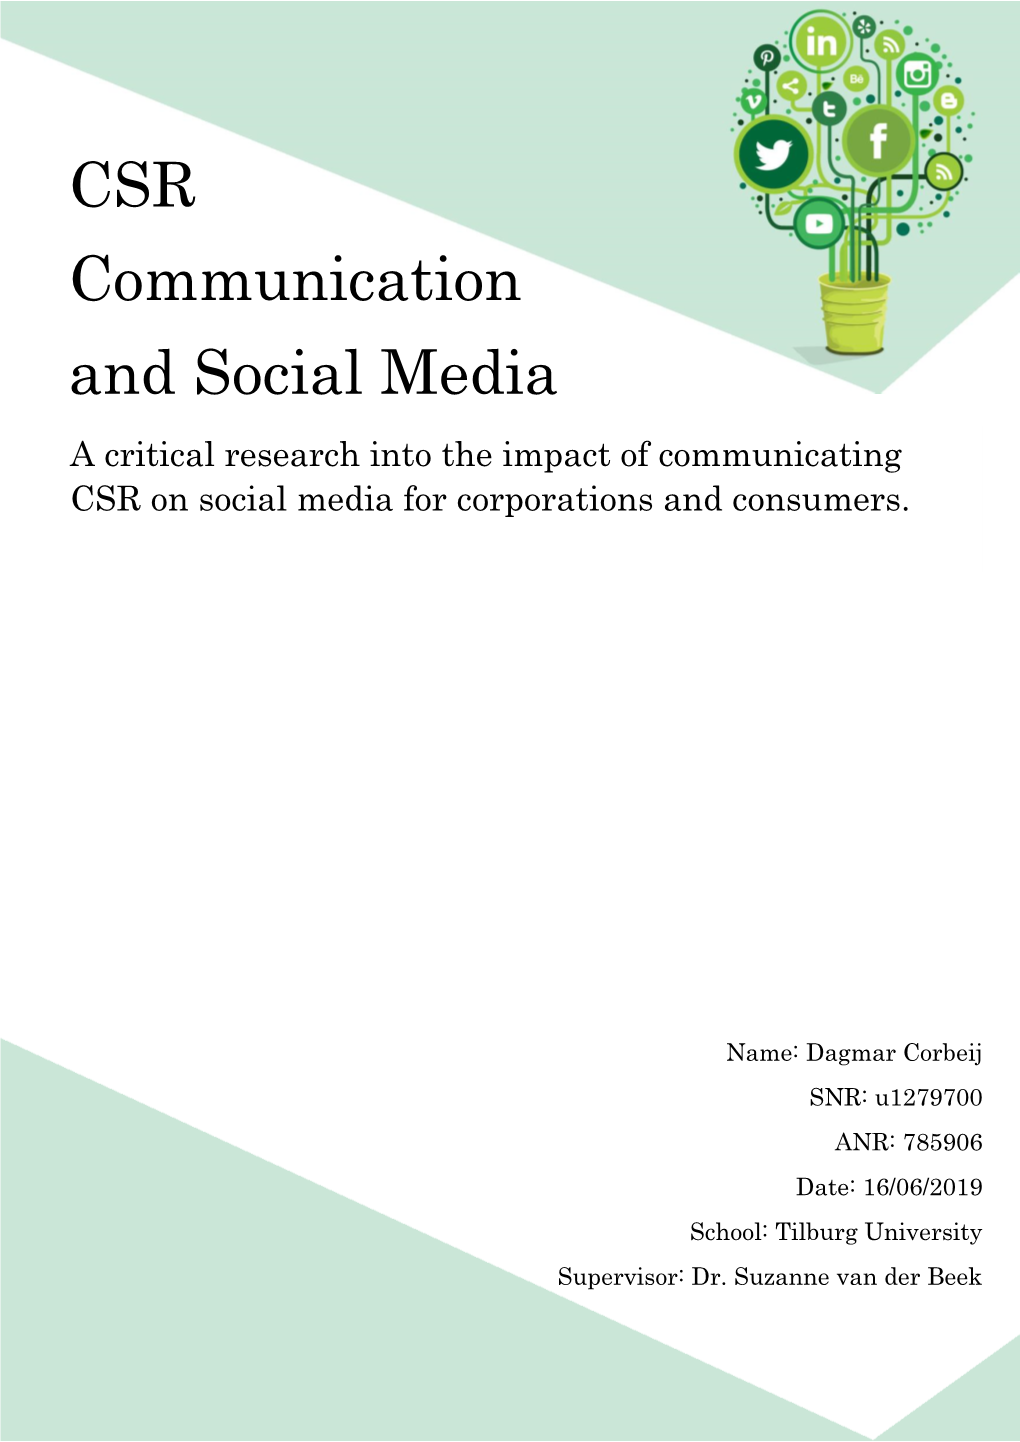 CSR Communication and Social Media a Critical Research Into the Impact of Communicating CSR on Social Media for Corporations and Consumers